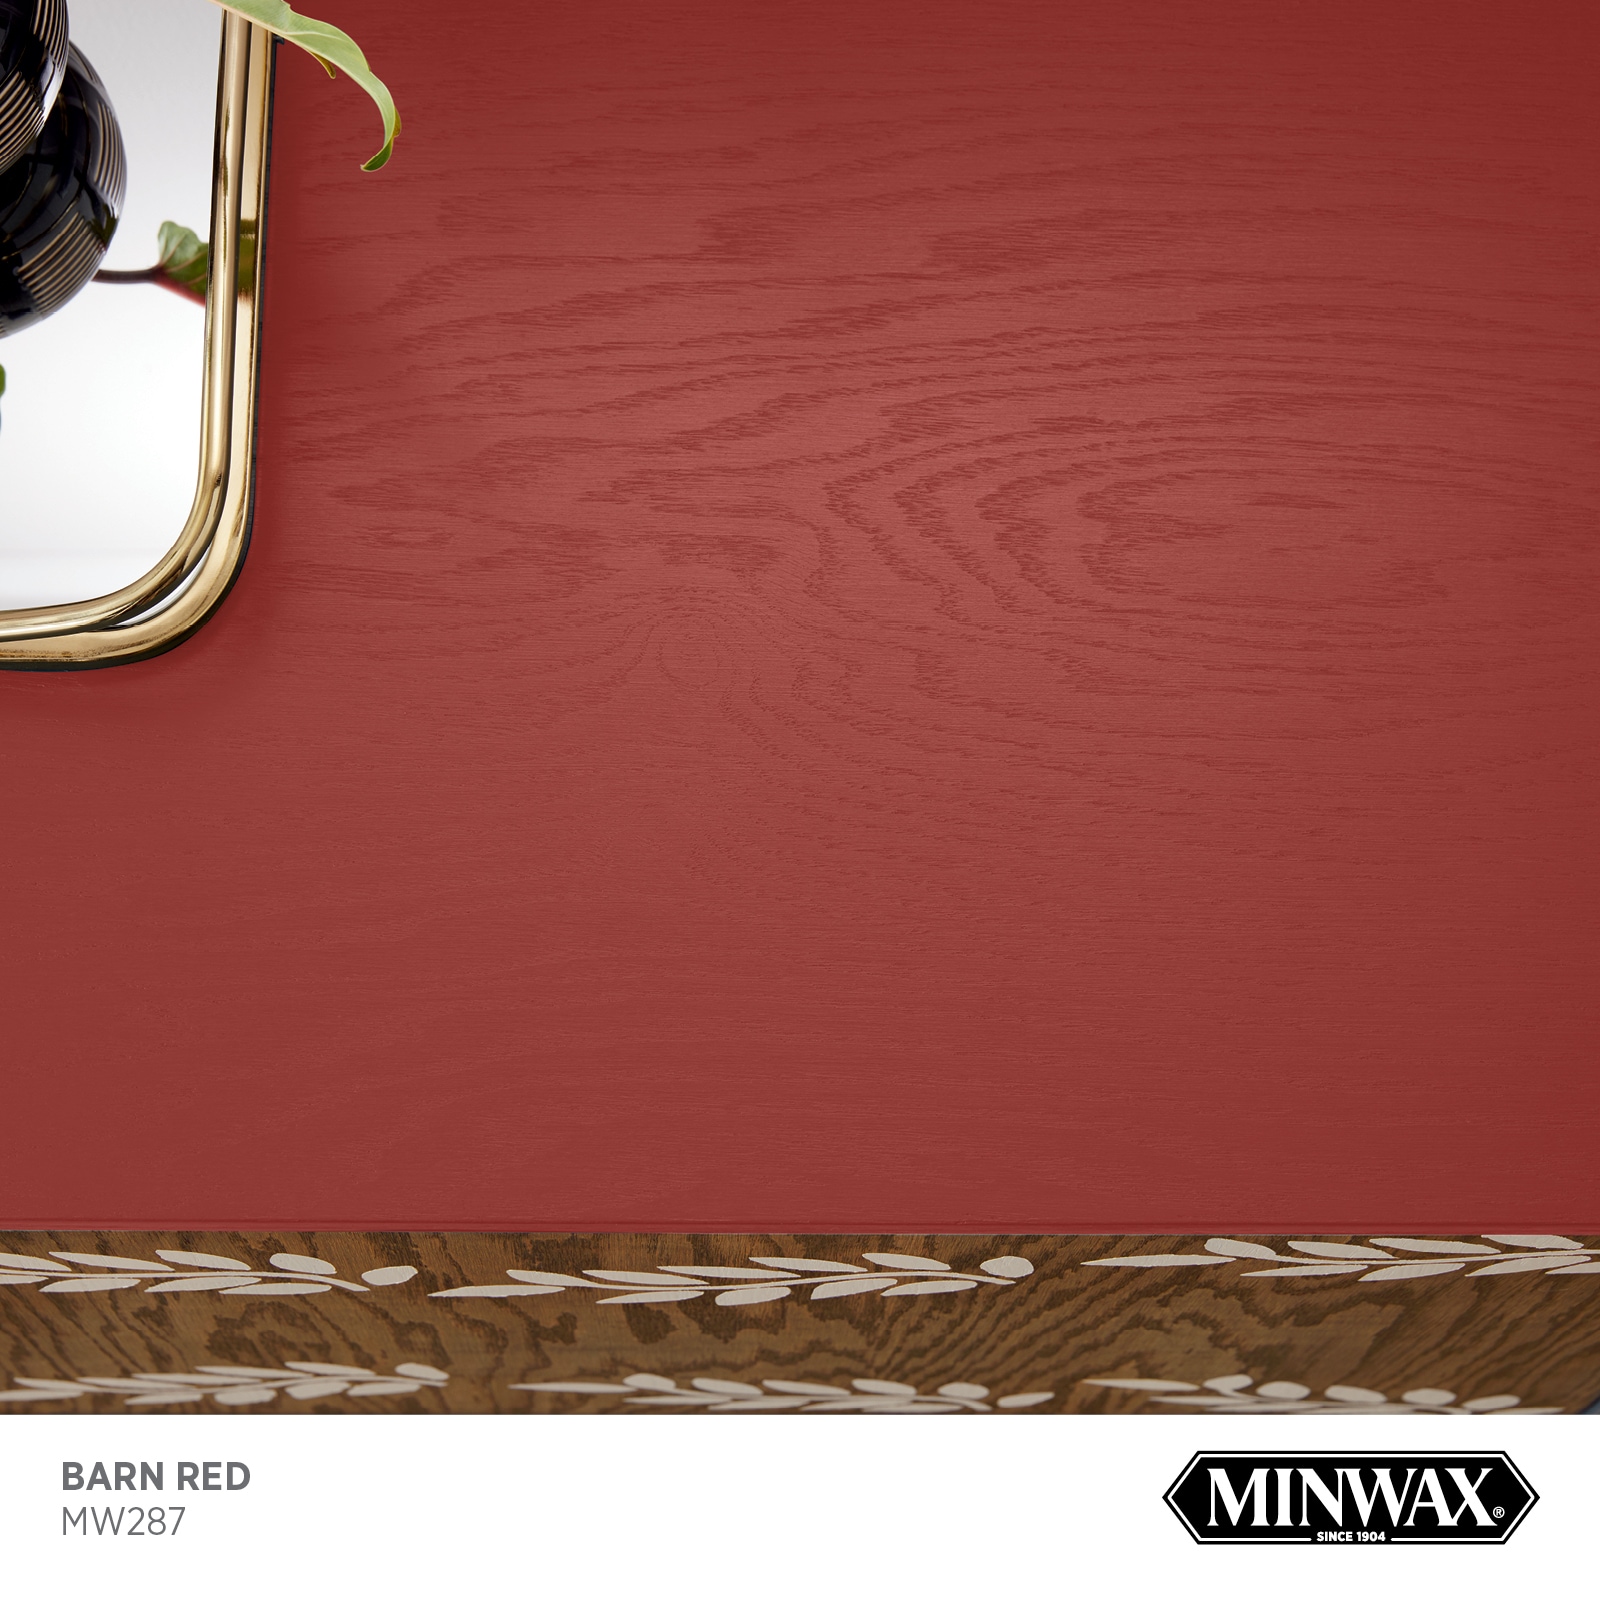 Wooden End Table Top MINWAX Barn Red 287